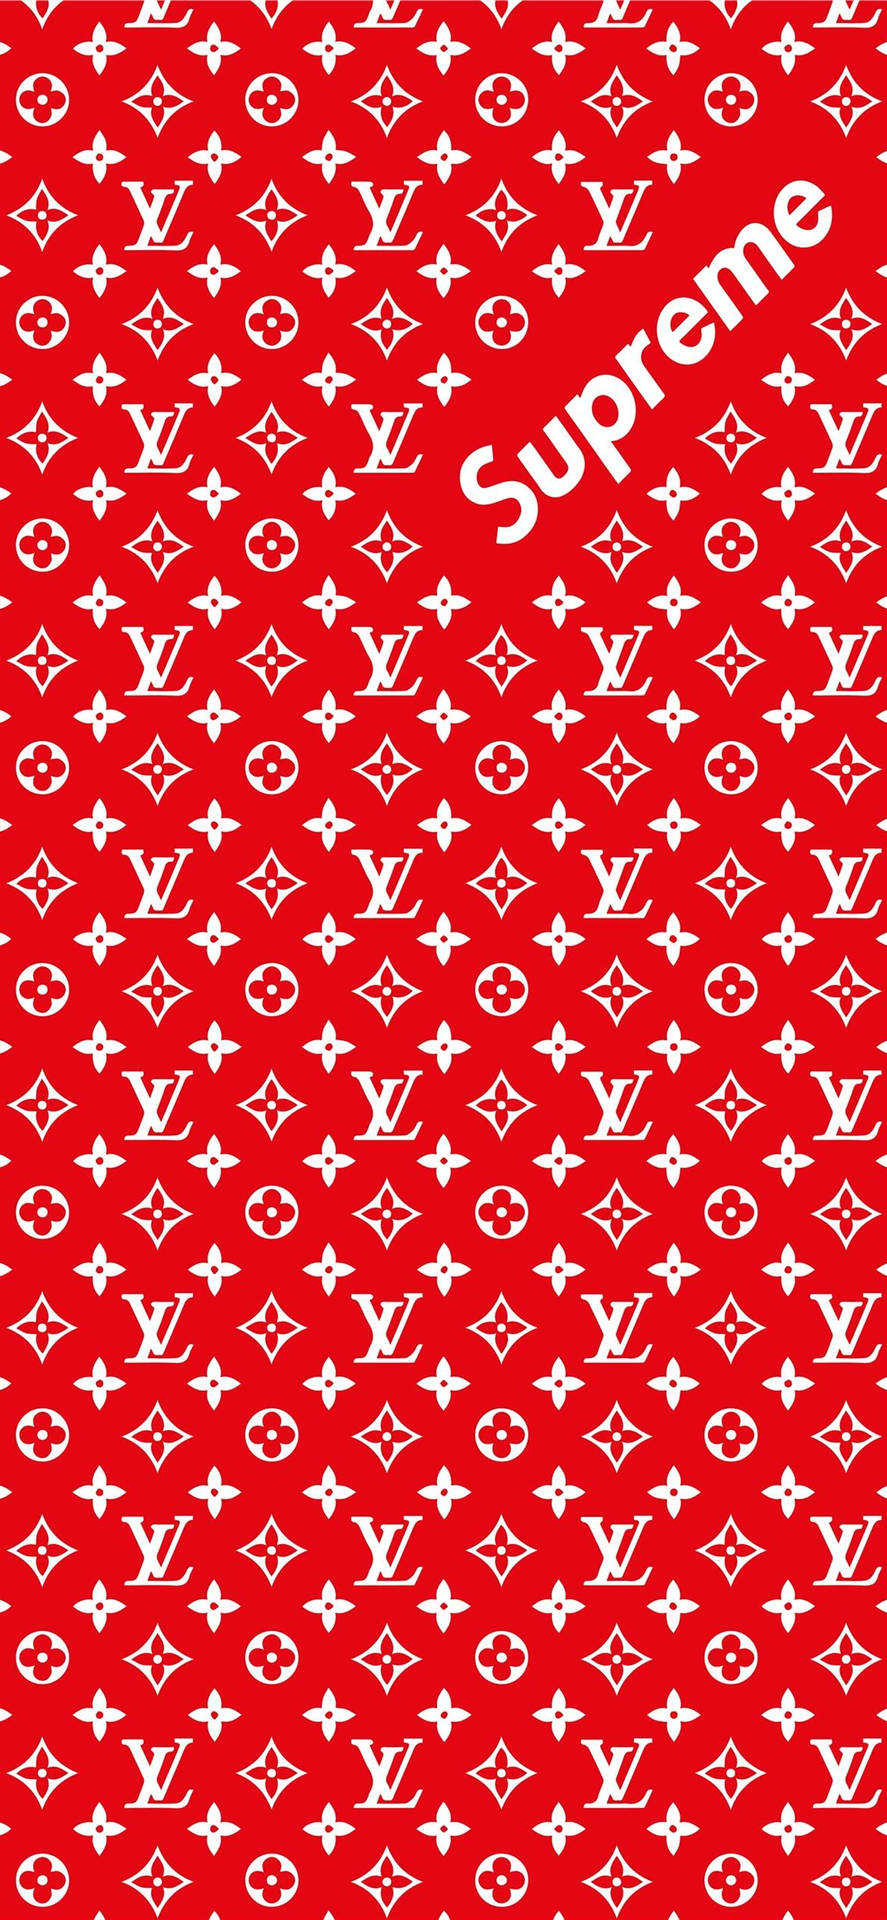 Red Supreme And Louis Vuitton Phone Wallpaper